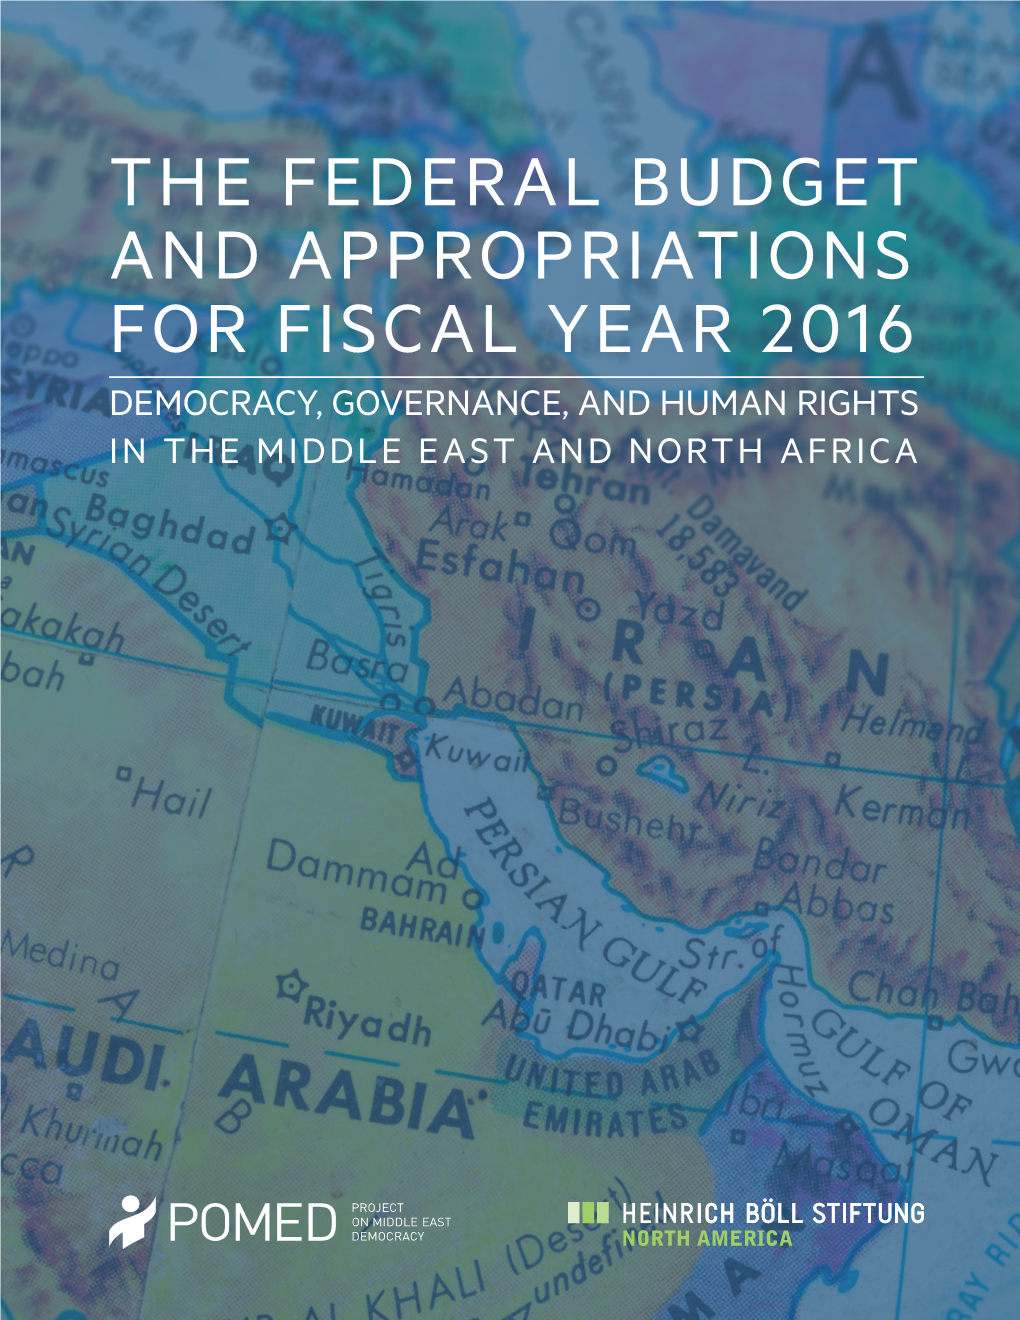 The Federal Budget and Appropriations for Fiscal